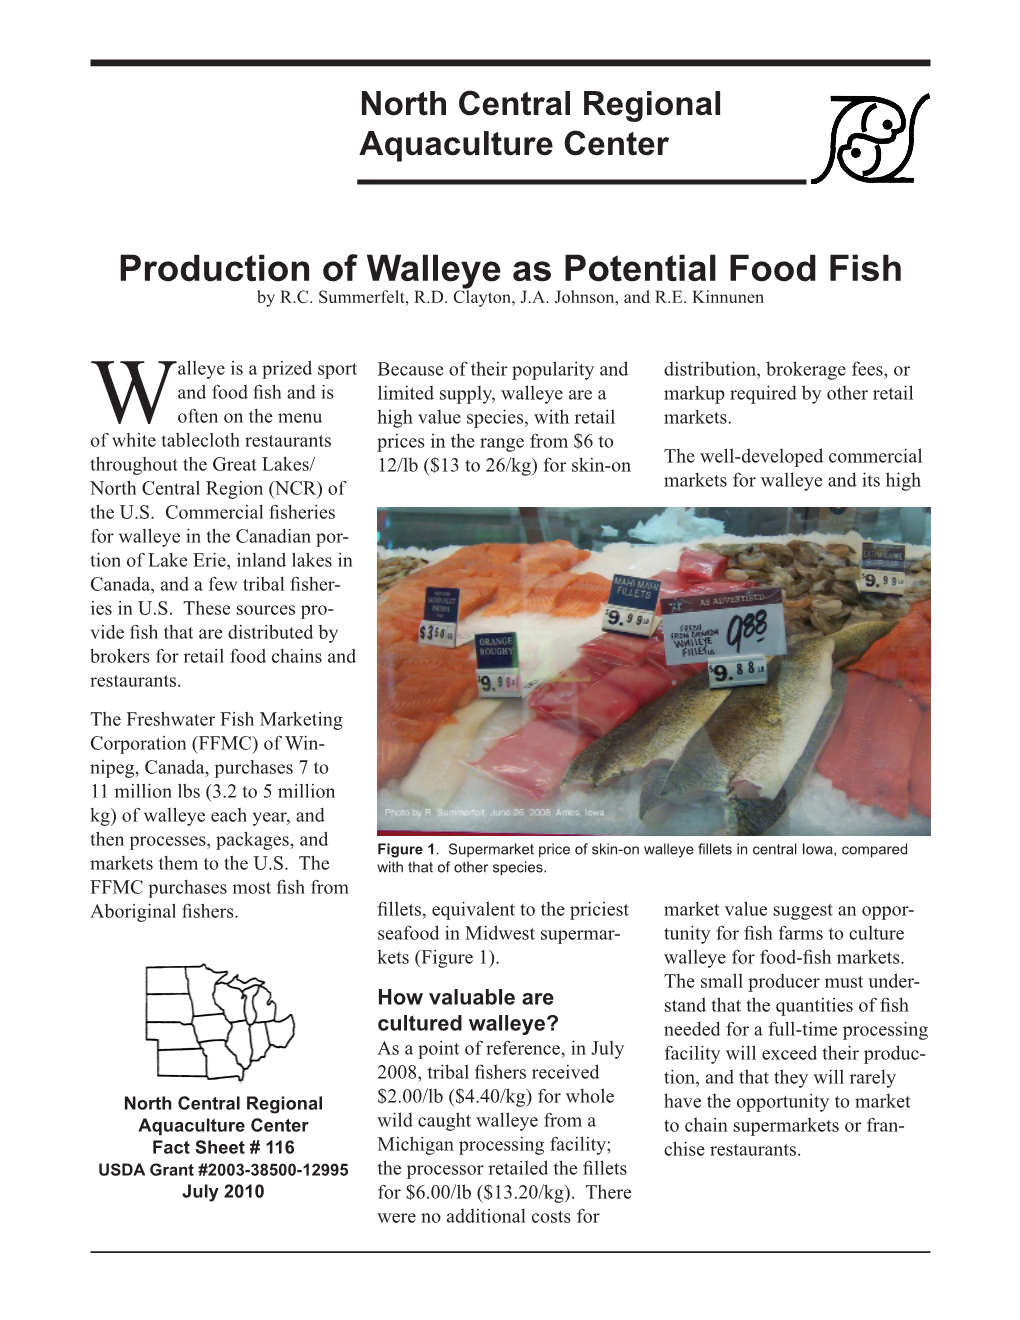 Production of Walleye As Potential Food Fish by R.C